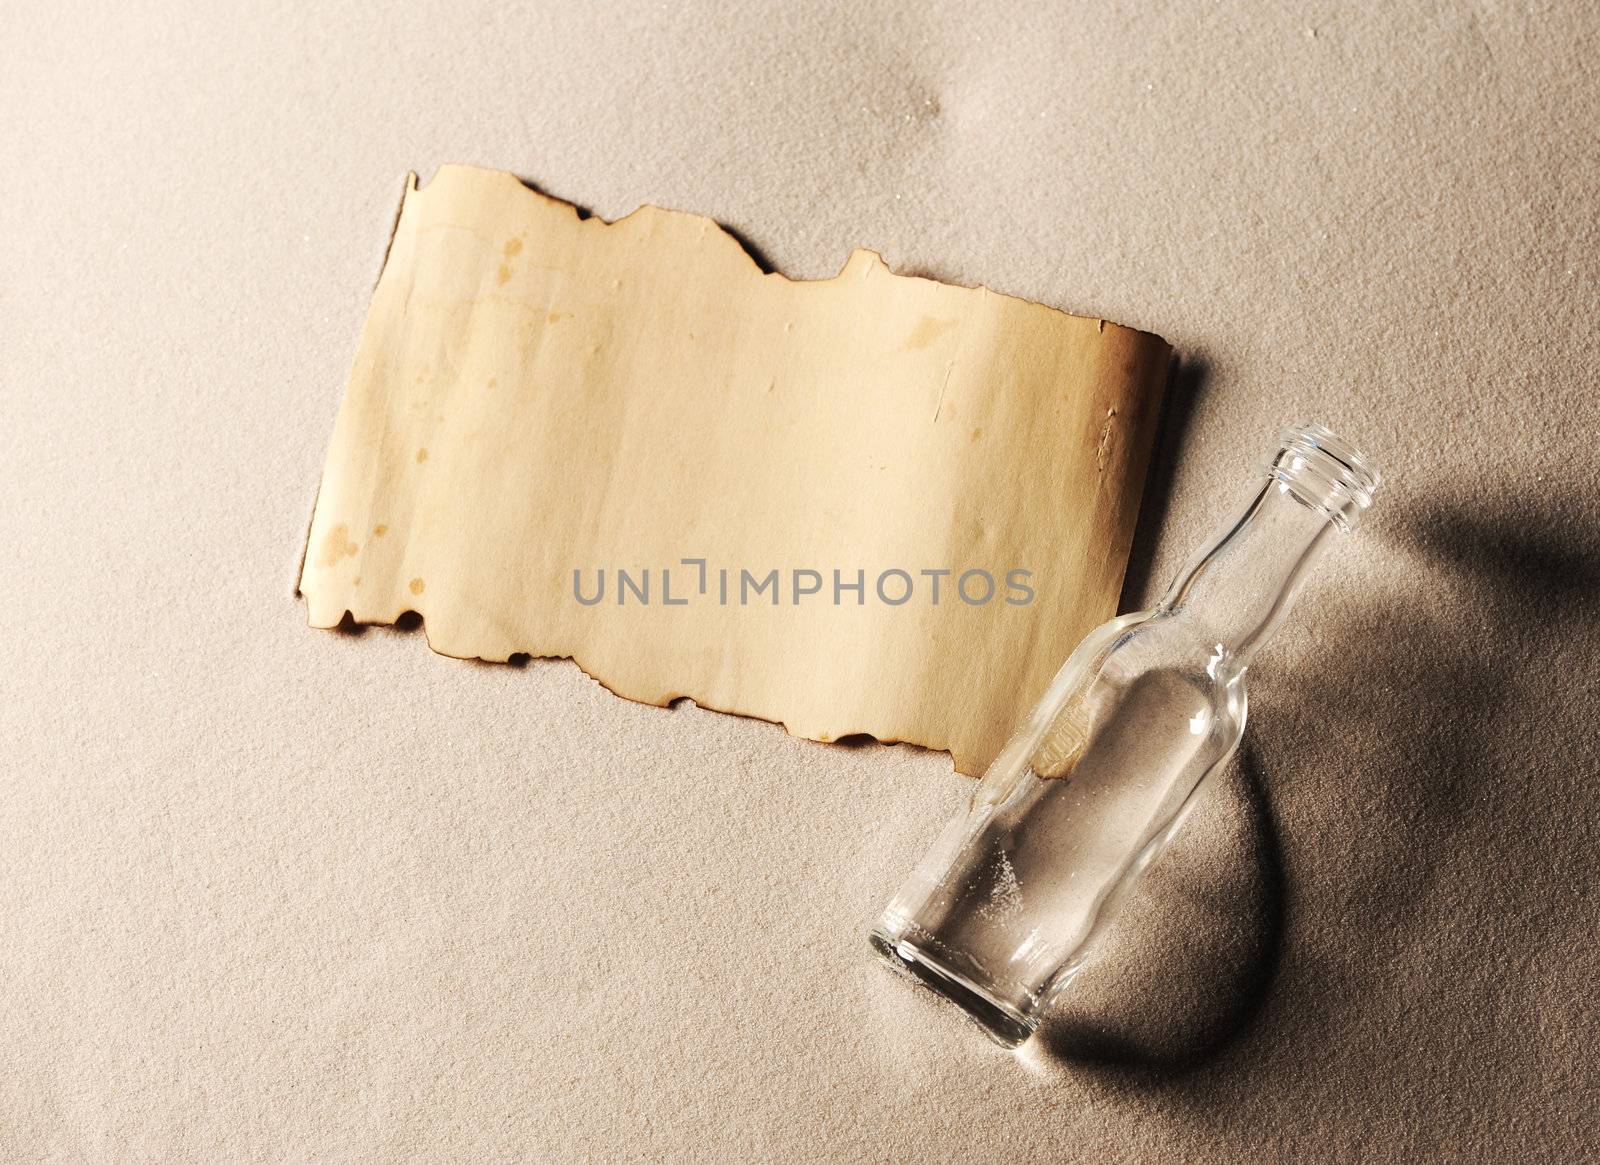 message in a bottle. The paper is blank to put whatever message you desire